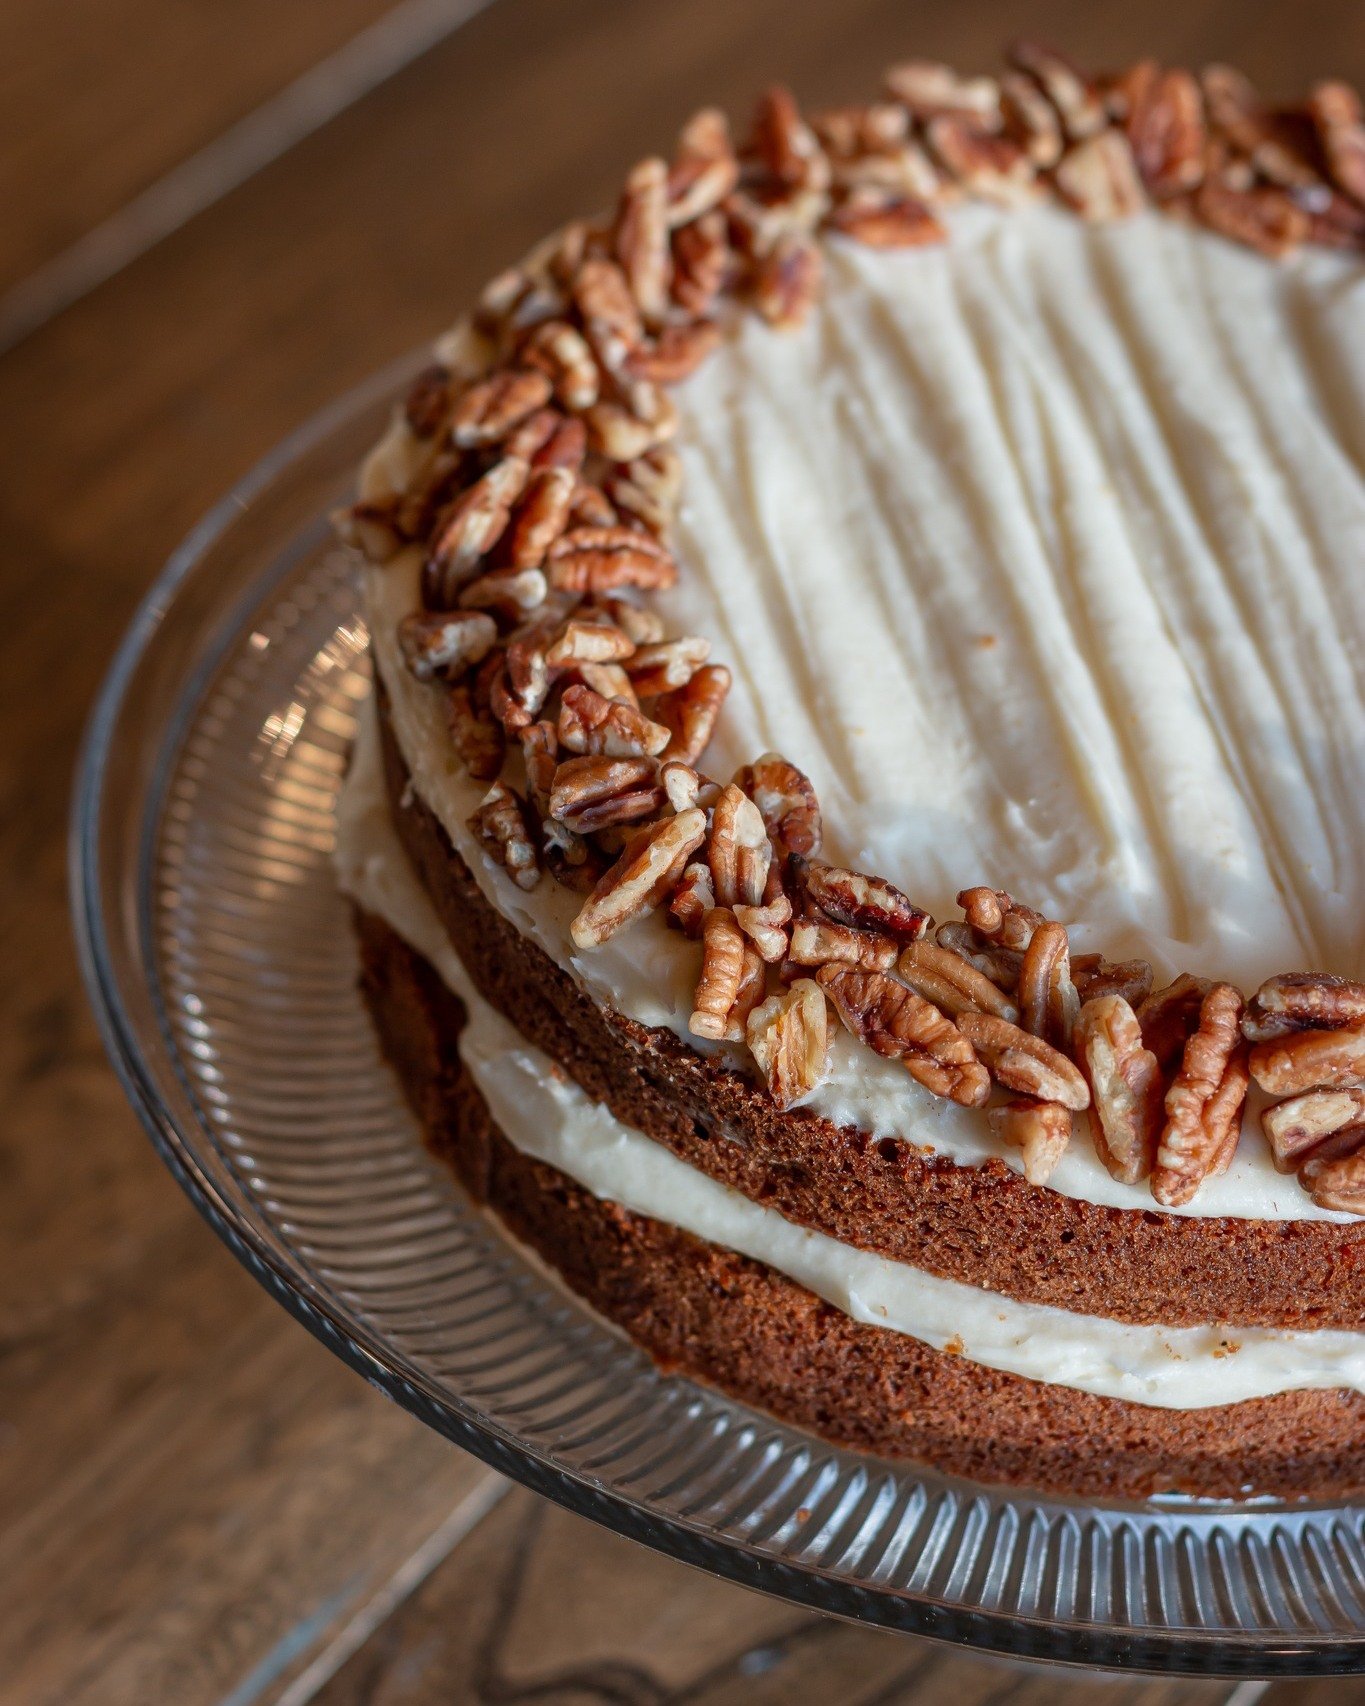 This weekend's special pastry is carrot cake! 🥕

We are very excited for this one. We started with a spiced carrot cake with pecans inside, and we brought it all together with a brown butter cream cheese frosting. This one is moist, warm, nutty, and